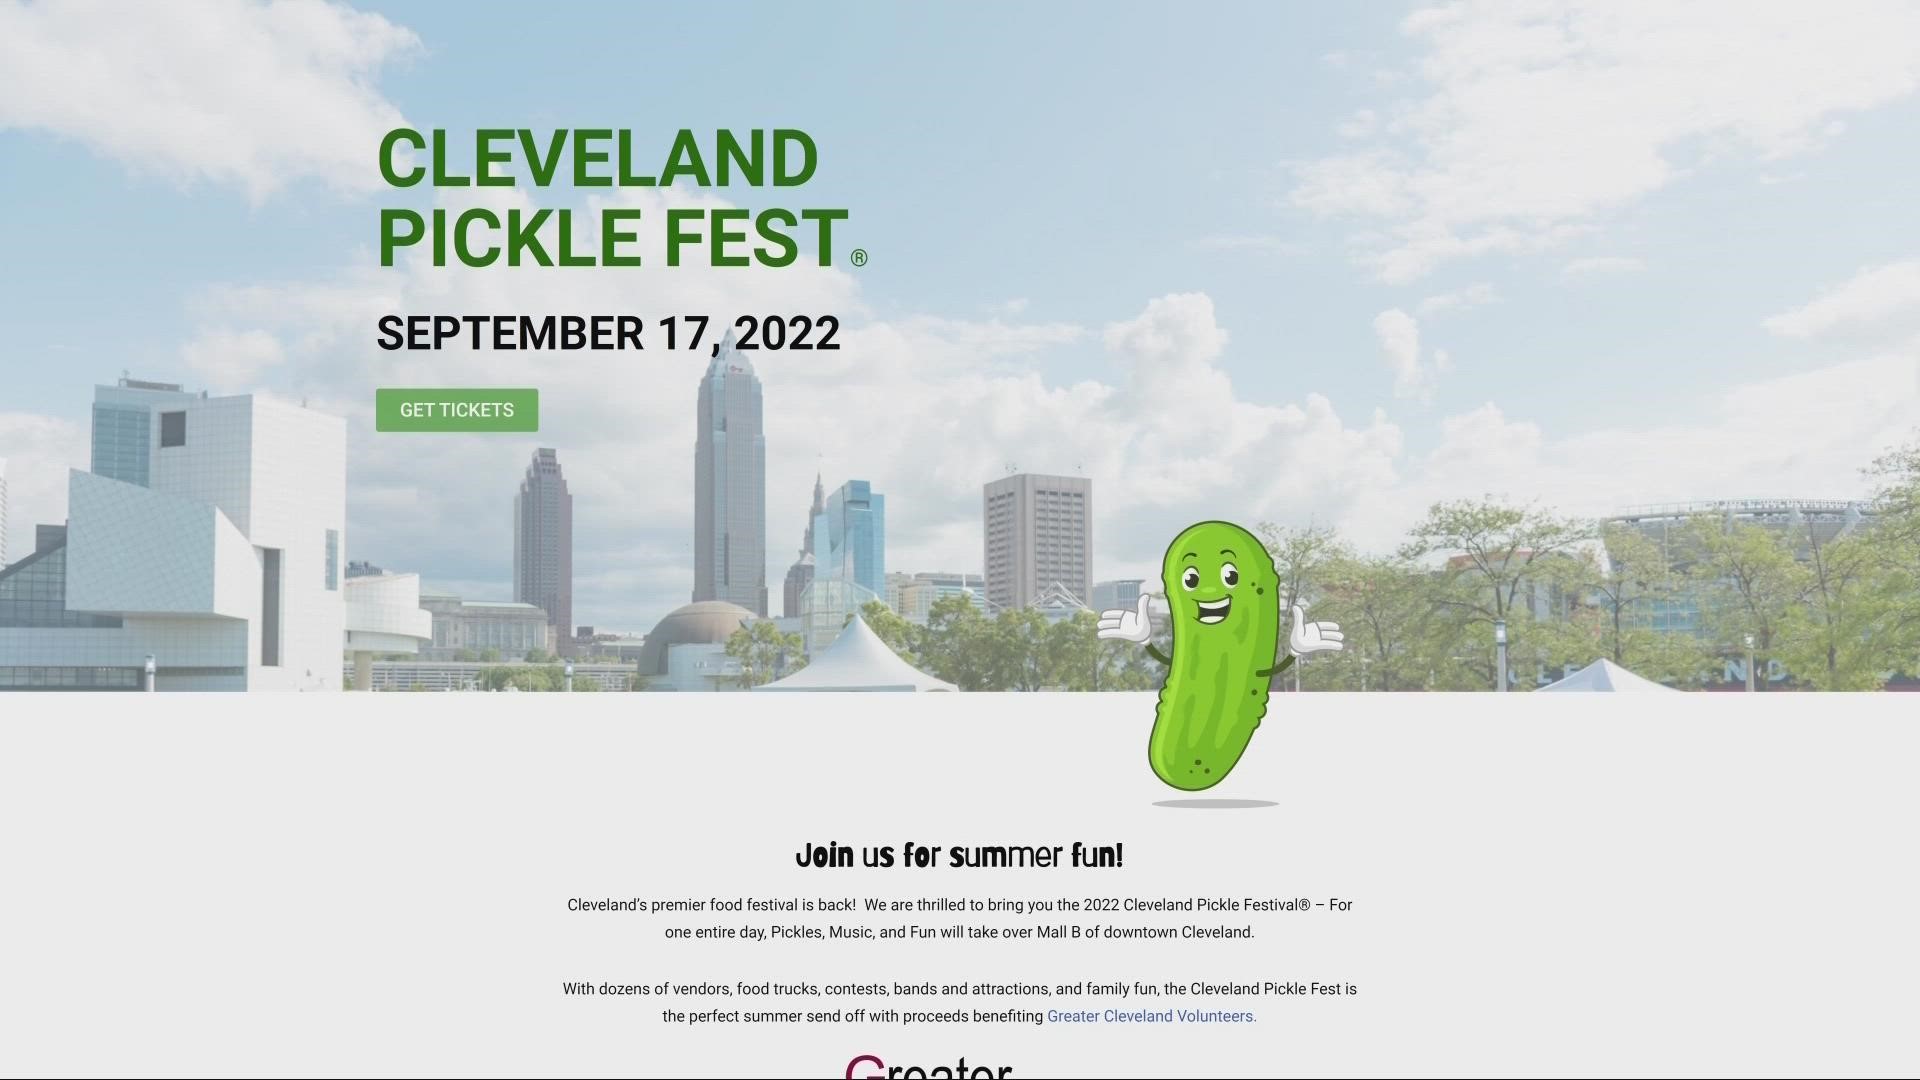 So whether you have a mild pension for pickles, or you're a passionate pickle person, your people await you this weekend at Cleveland Pickle Fest.